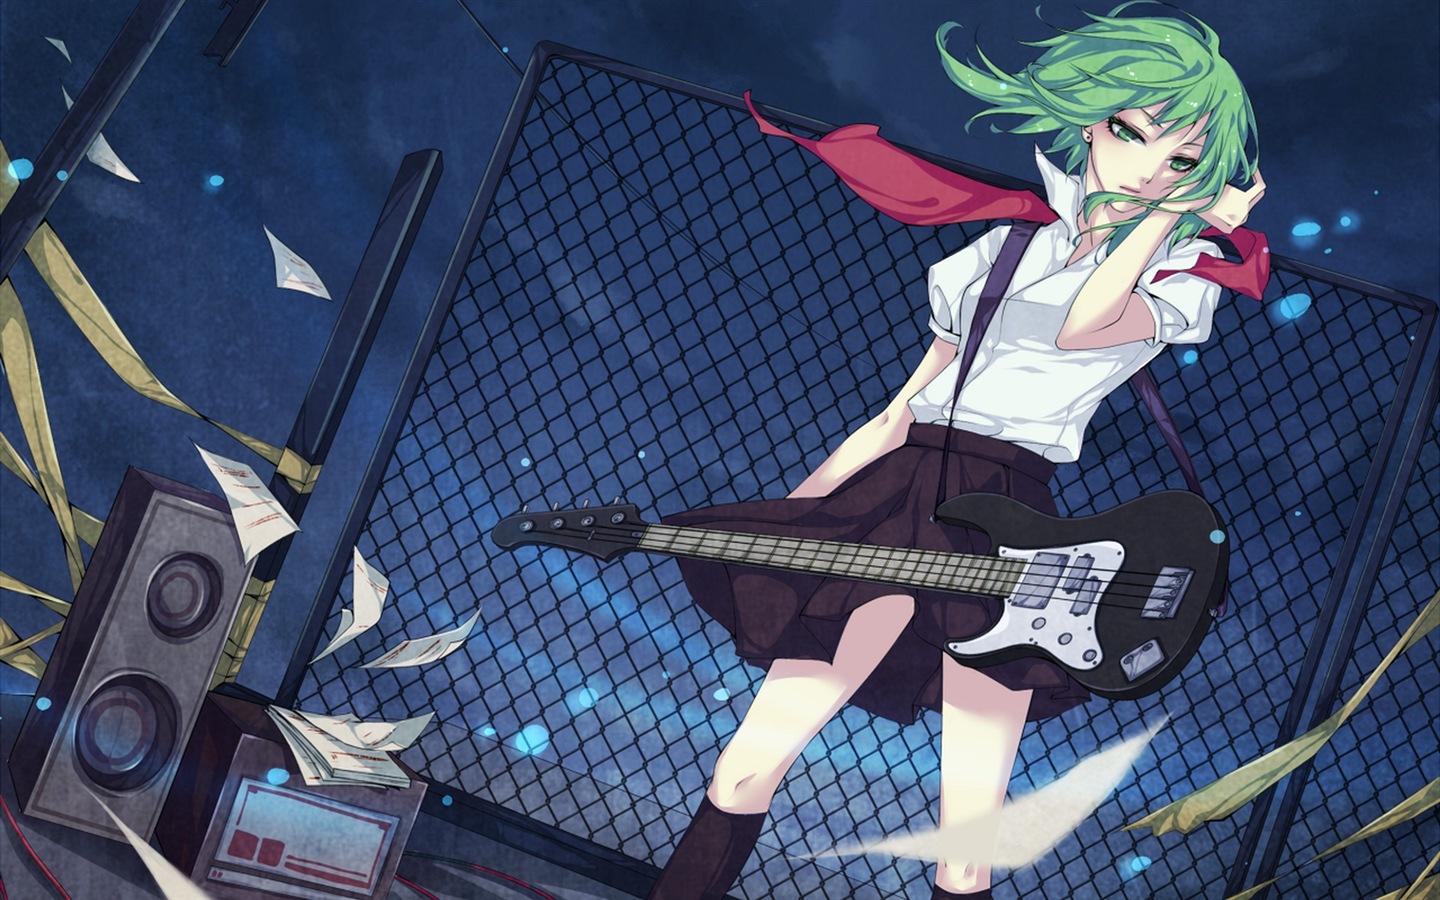 Musique guitare anime girl wallpapers HD #16 - 1440x900